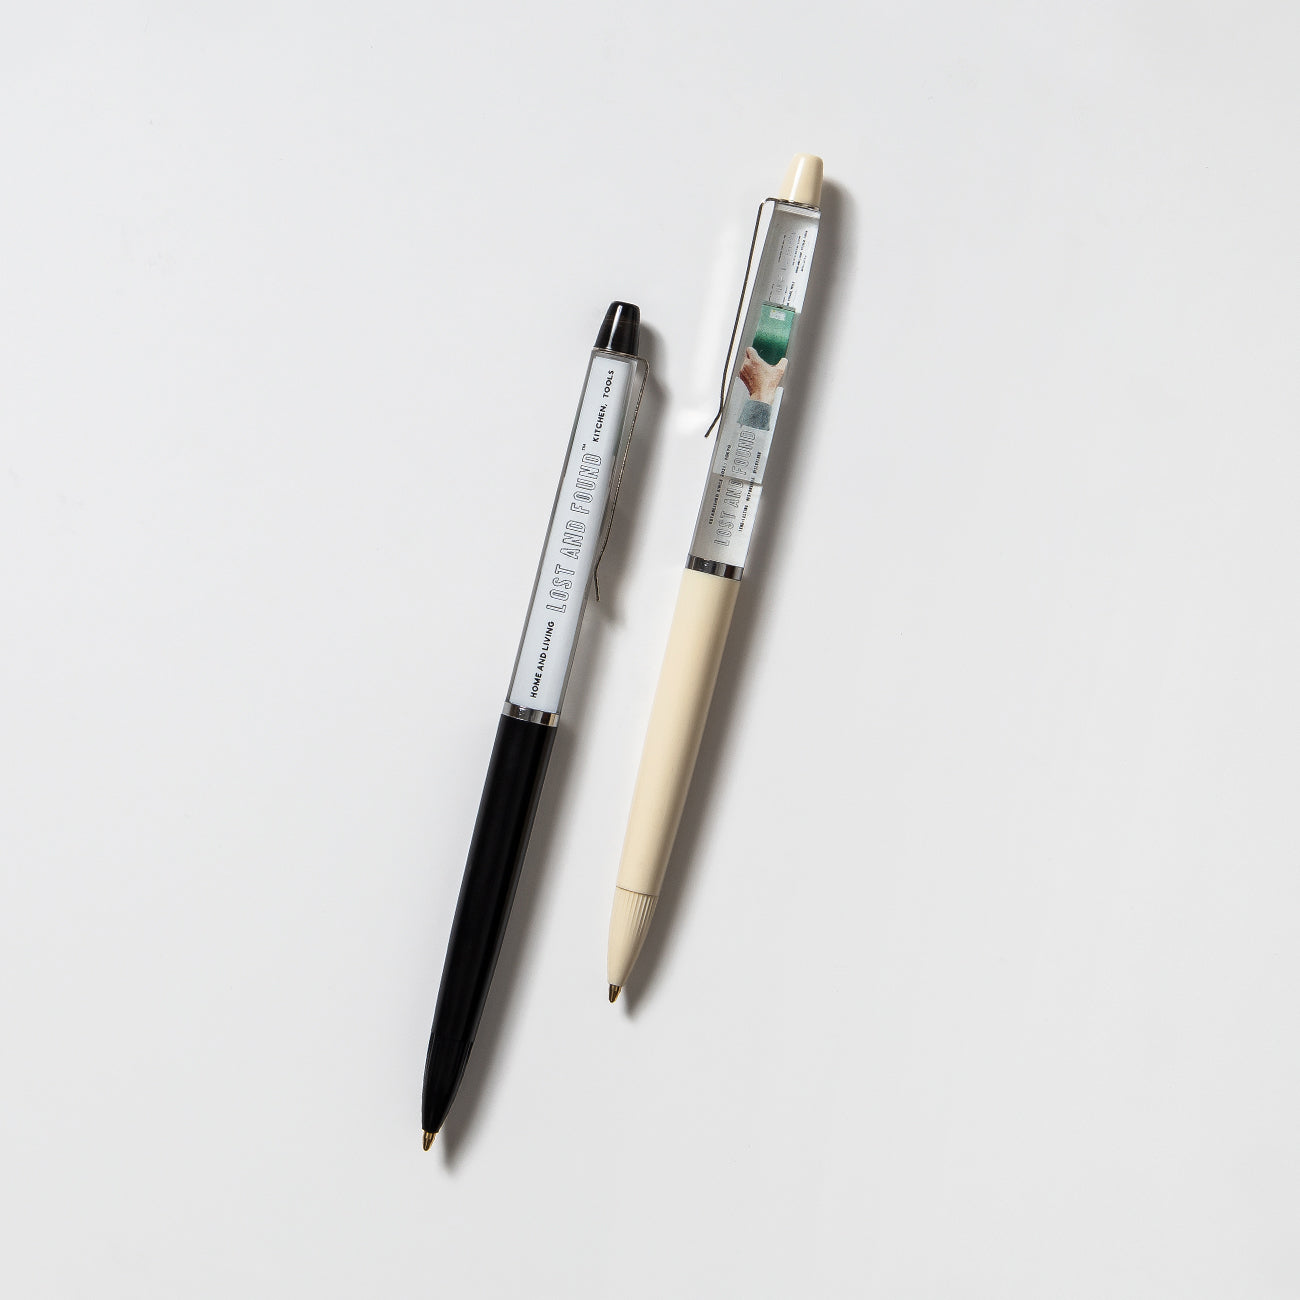 LOST AND FOUND Floating Pen（BEIGE)